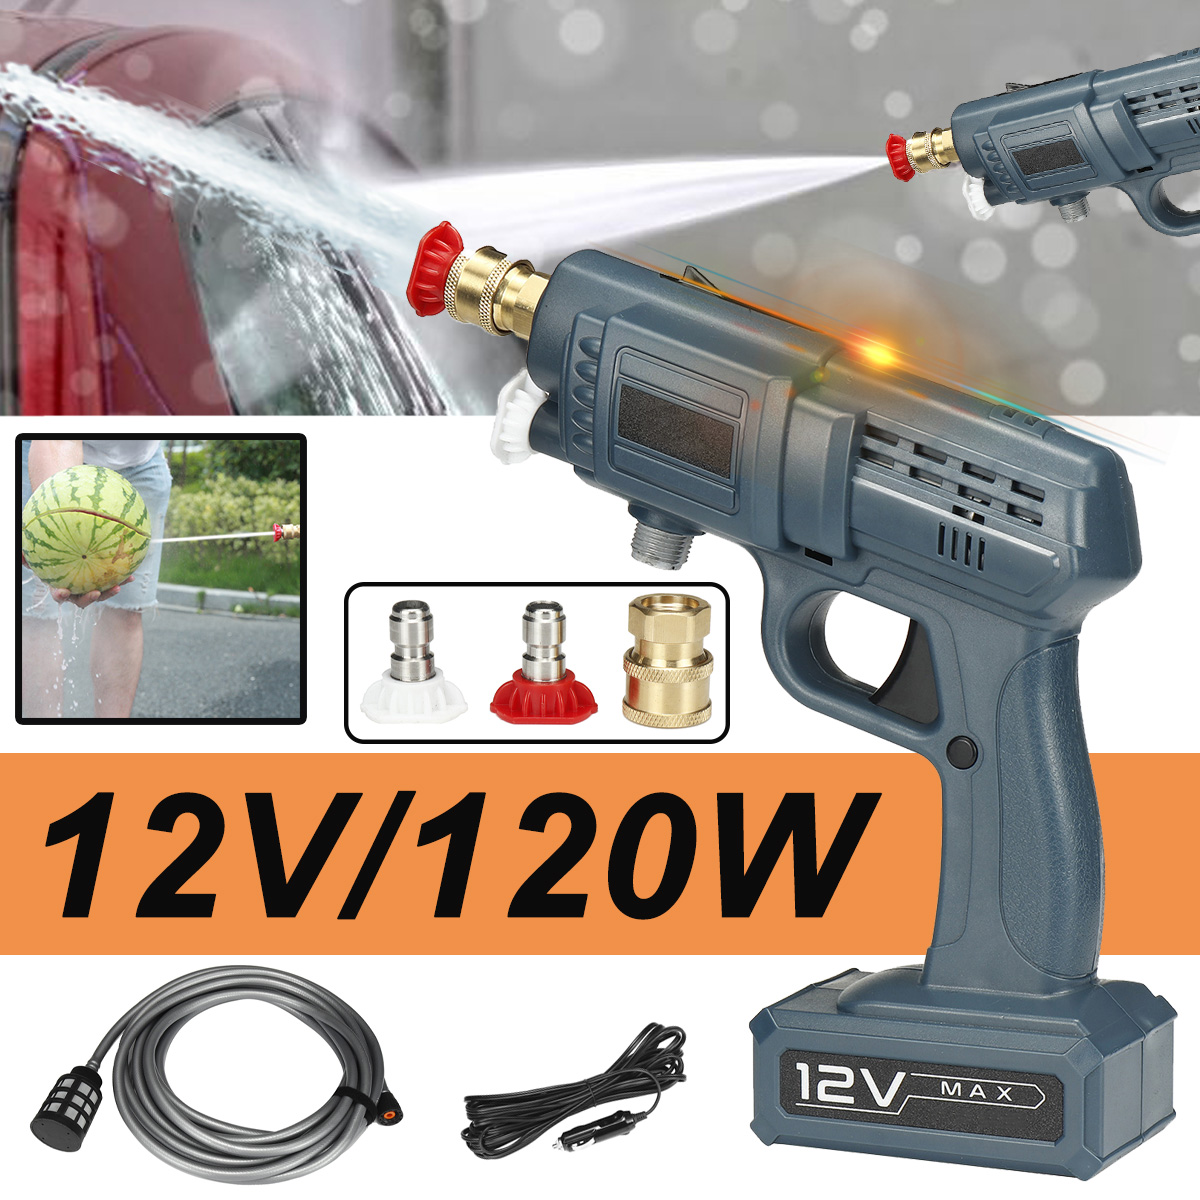 12V-High-Pressure-Washer-Wireless-Car-Washing-Guns-Machine-Garden-Cleaning-Jet-Tool-Without-Battery-1834465-2